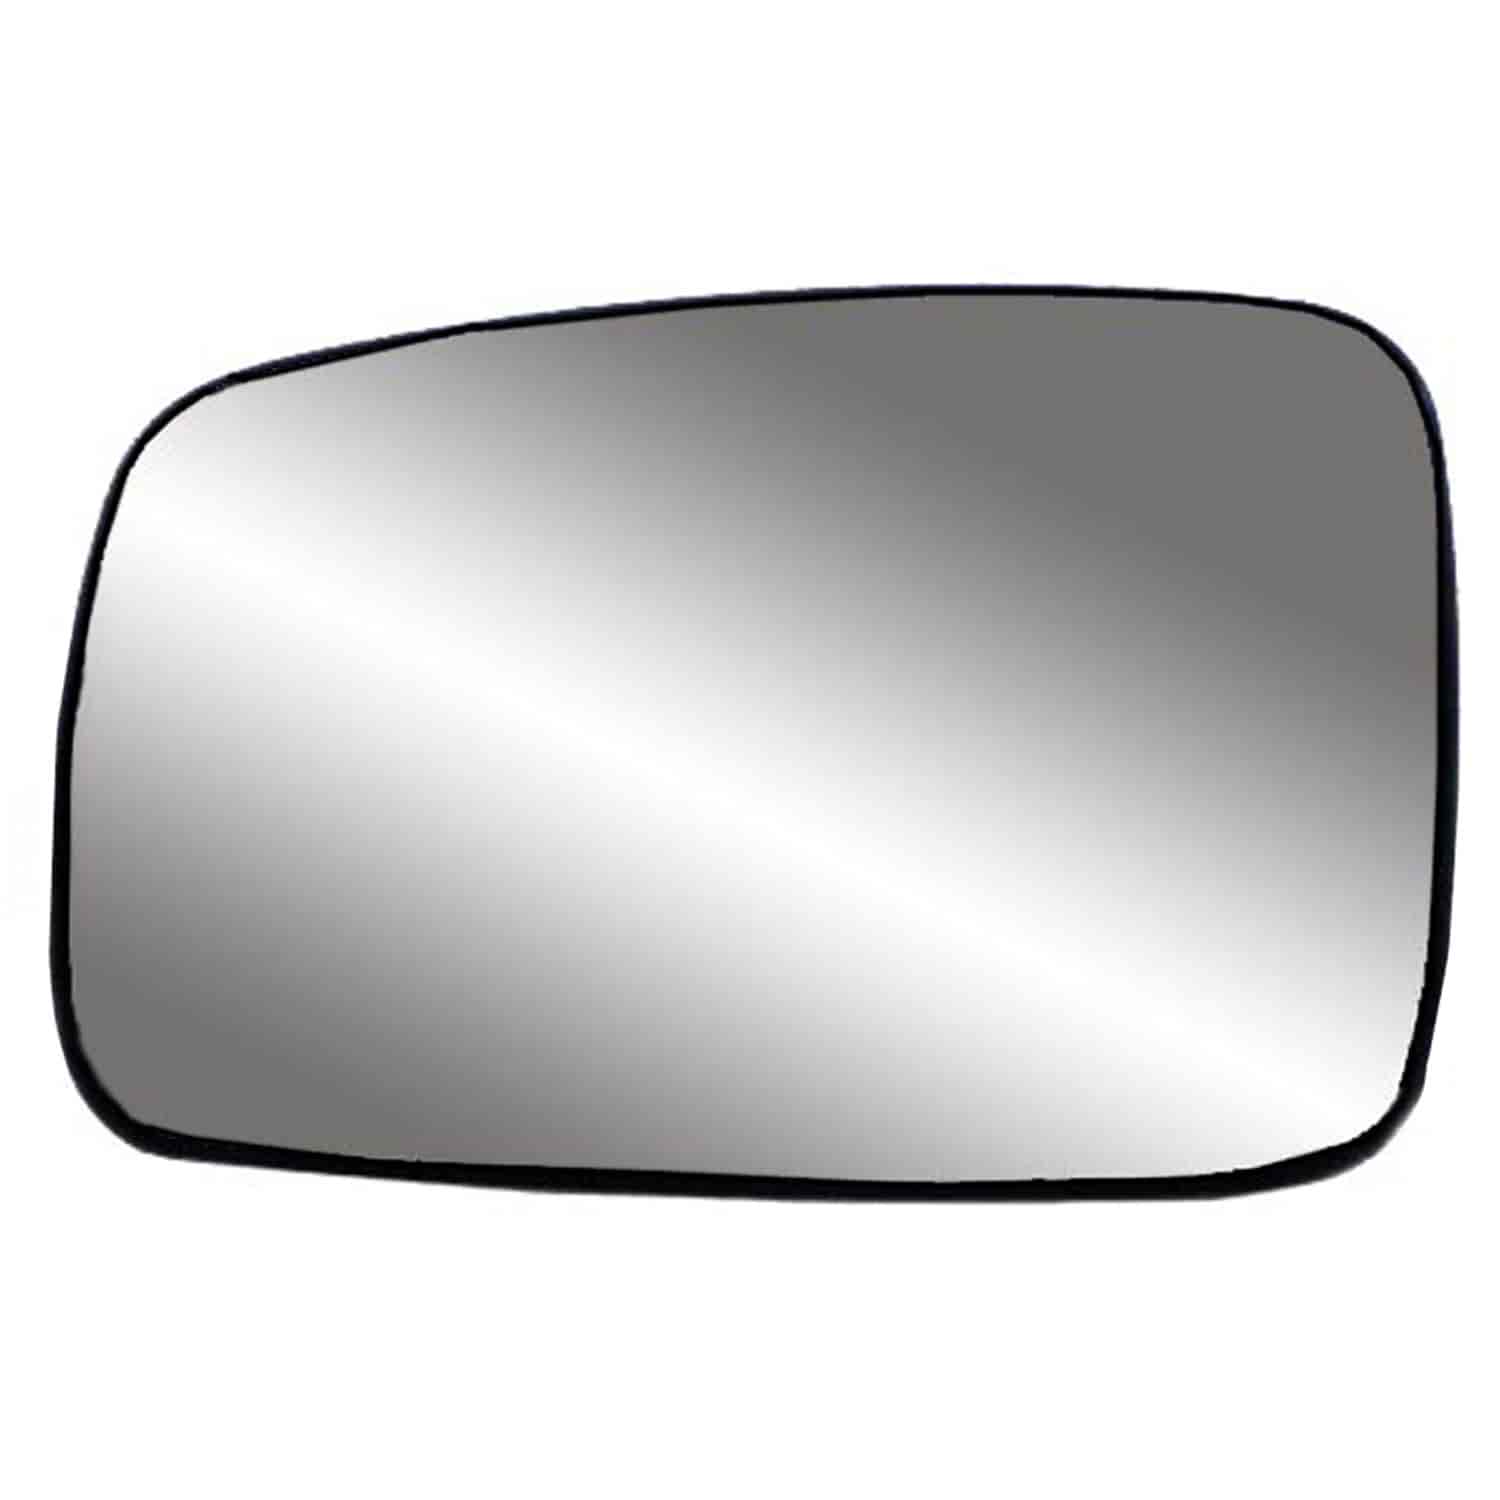 Replacement Glass Assembly for 03-09 Sorento replace your cracked or broken driver side mirror glass